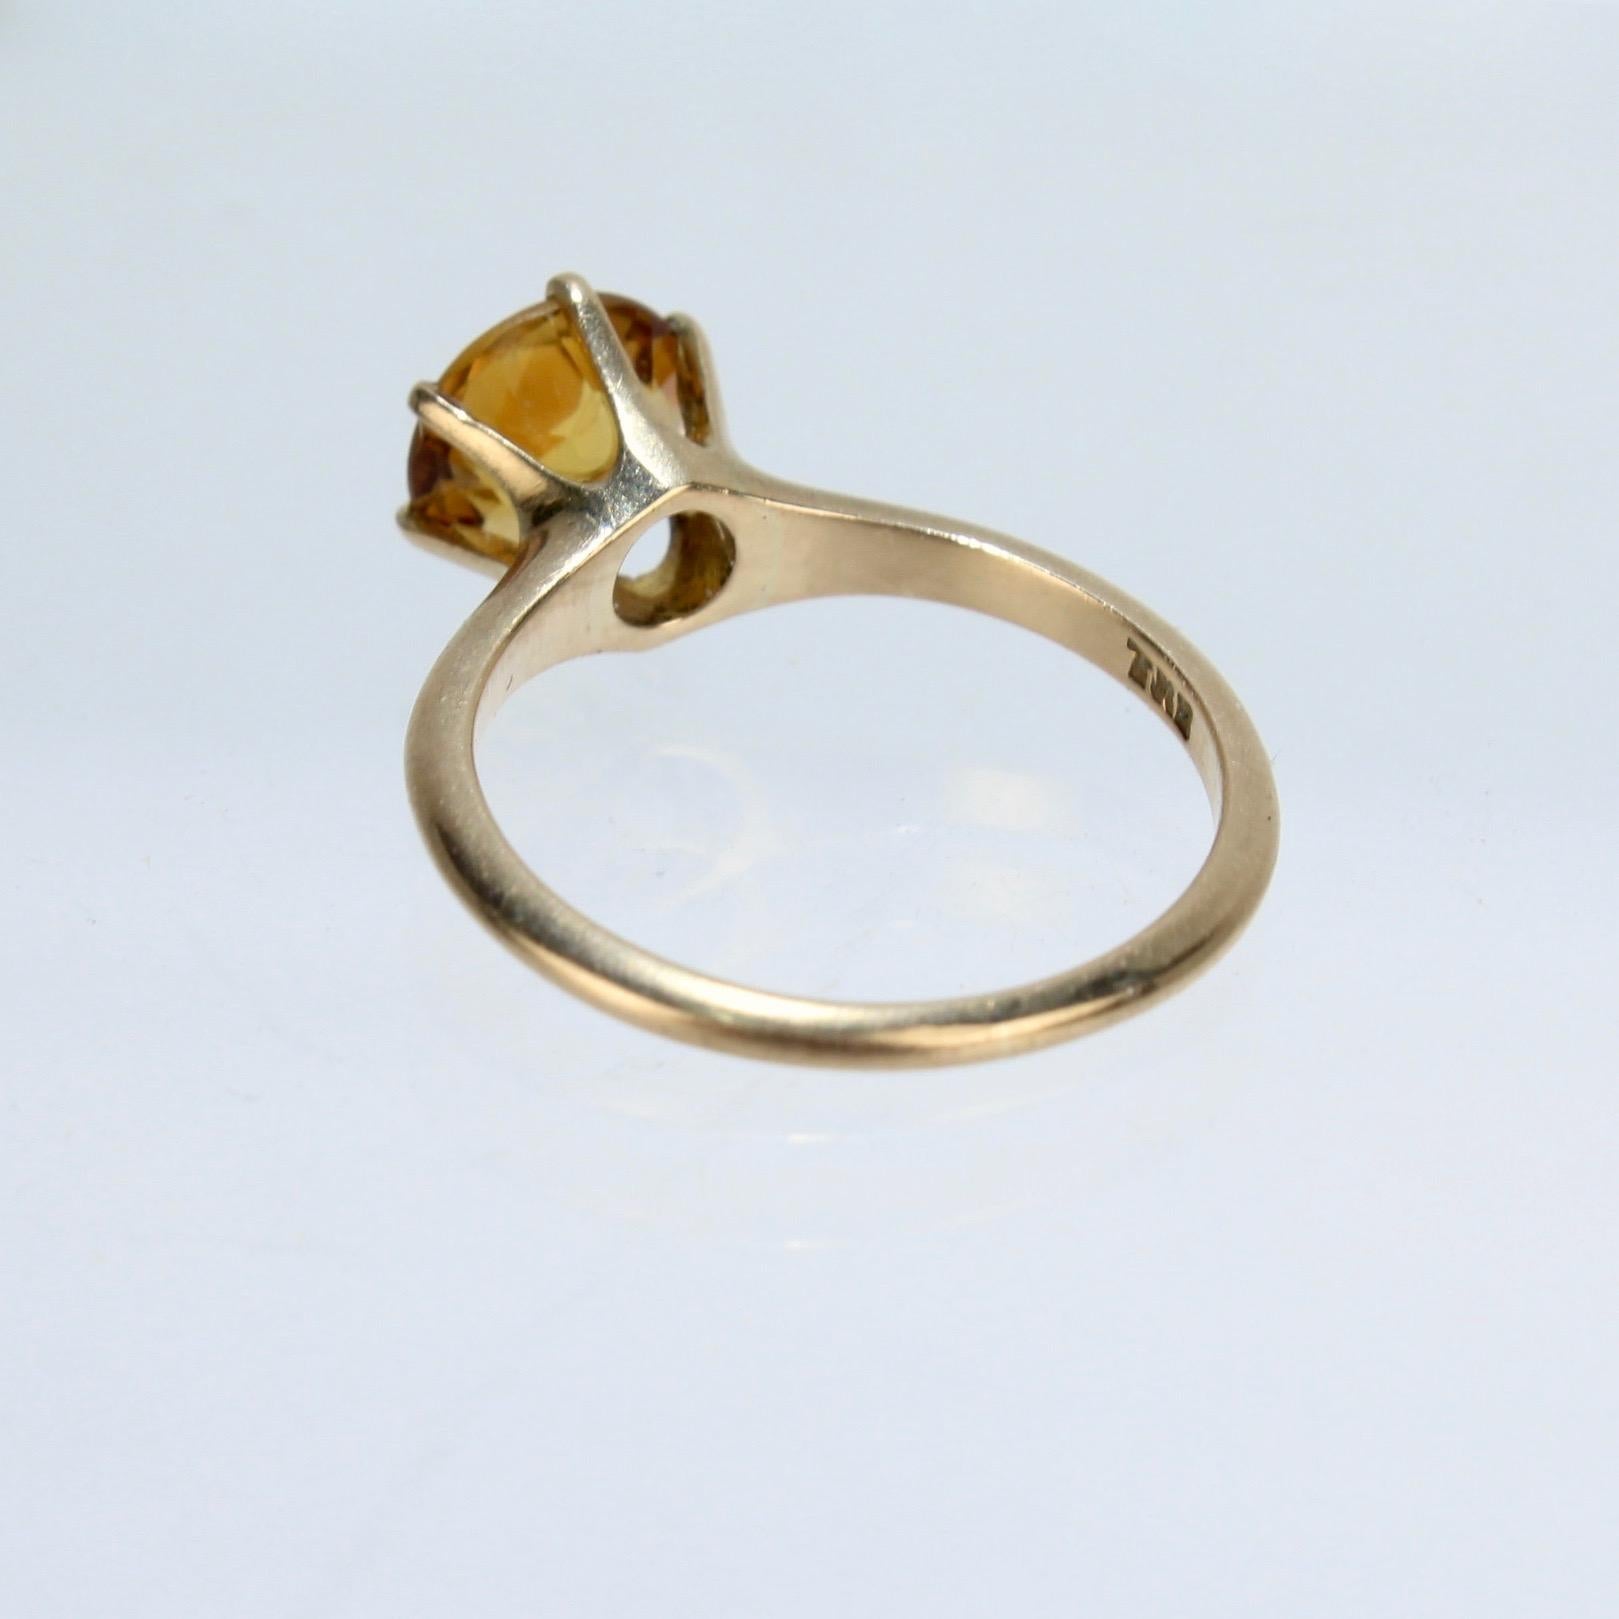 Round Cut Vintage Gold and Orange Citrine Solitaire Ring